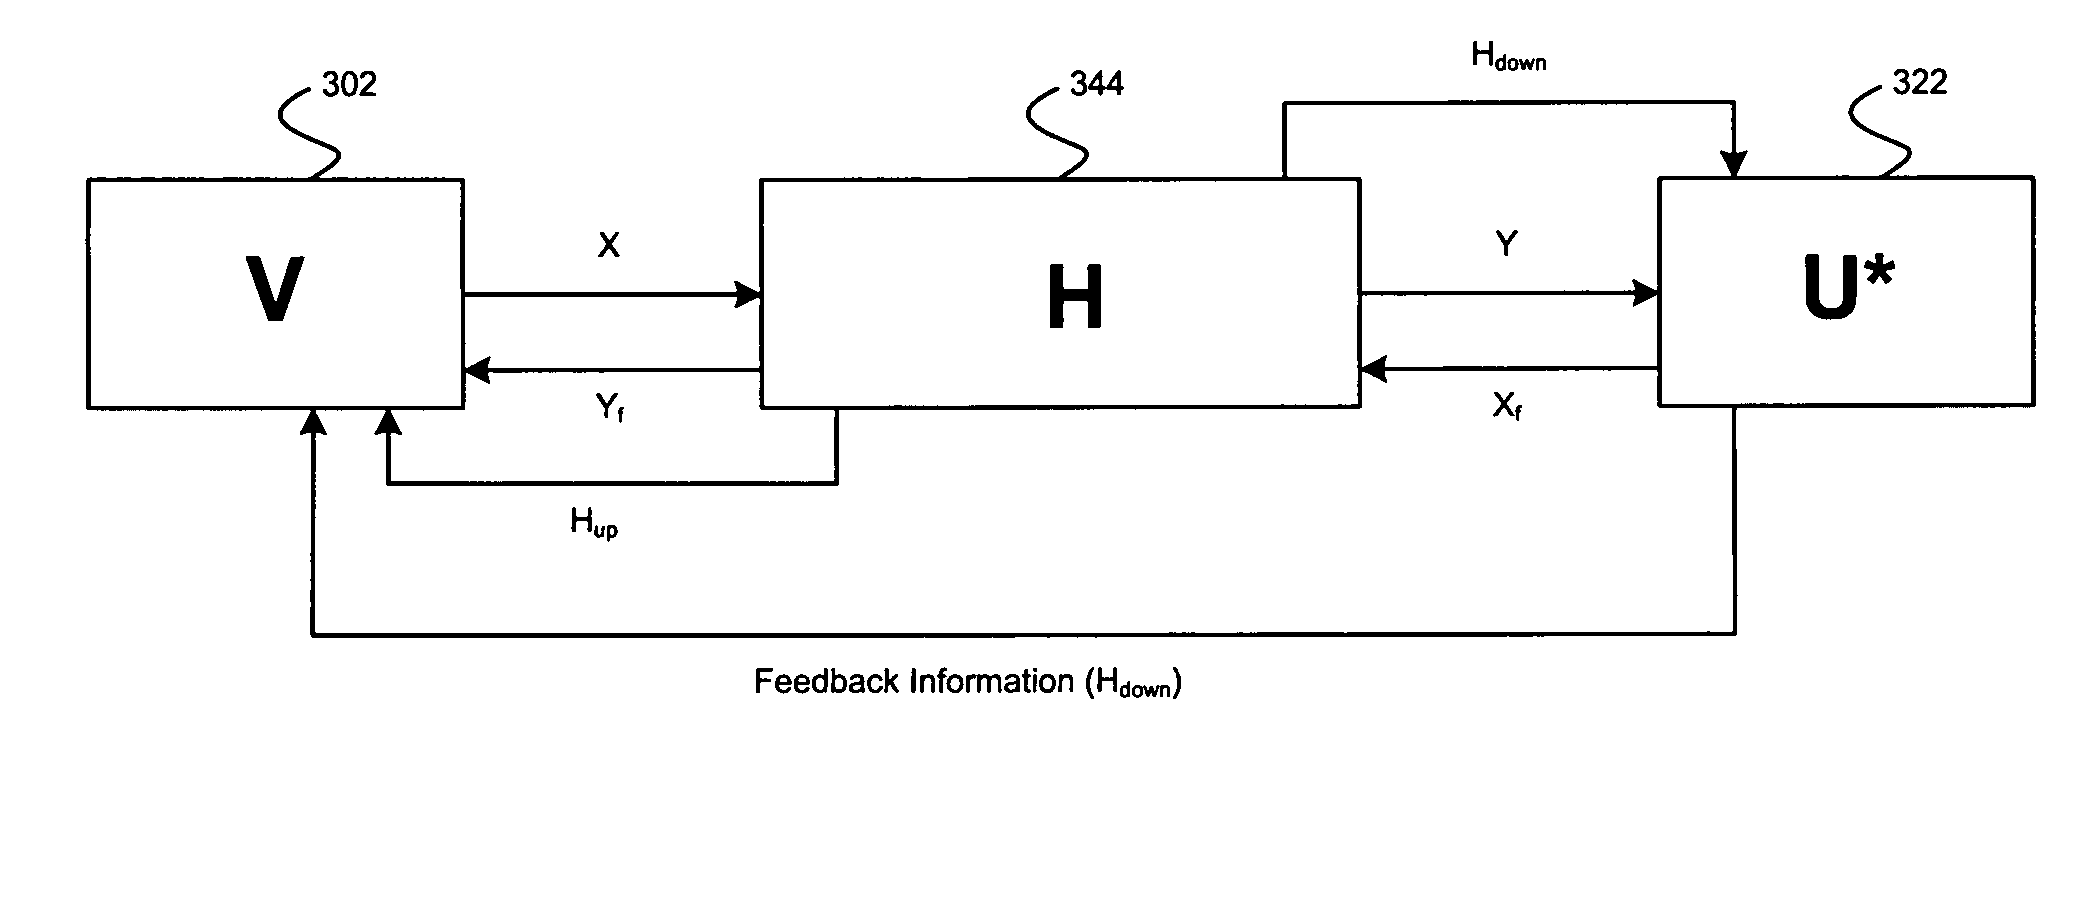 Method and system for utilizing givens rotation to reduce feedback information overhead